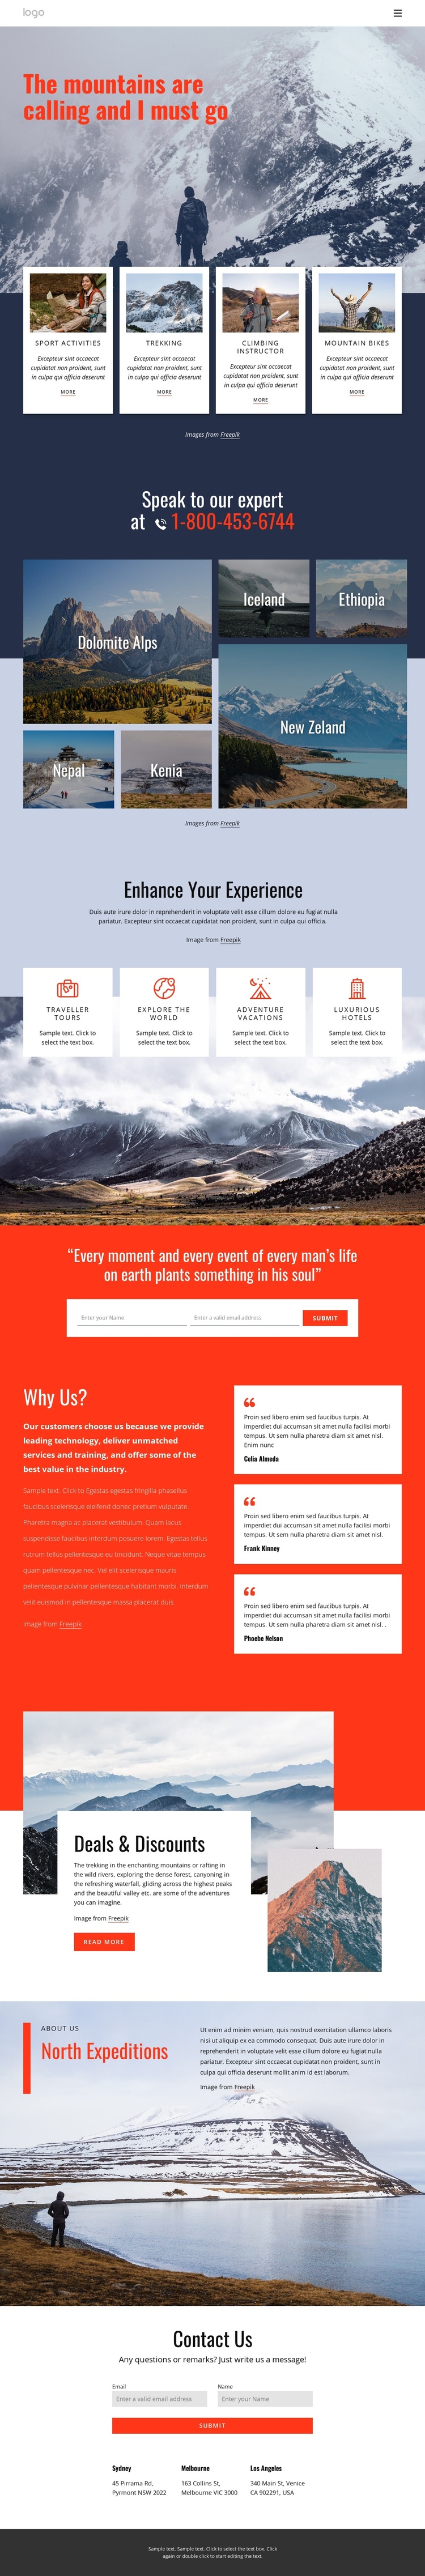 We offer hiking tours Joomla Template